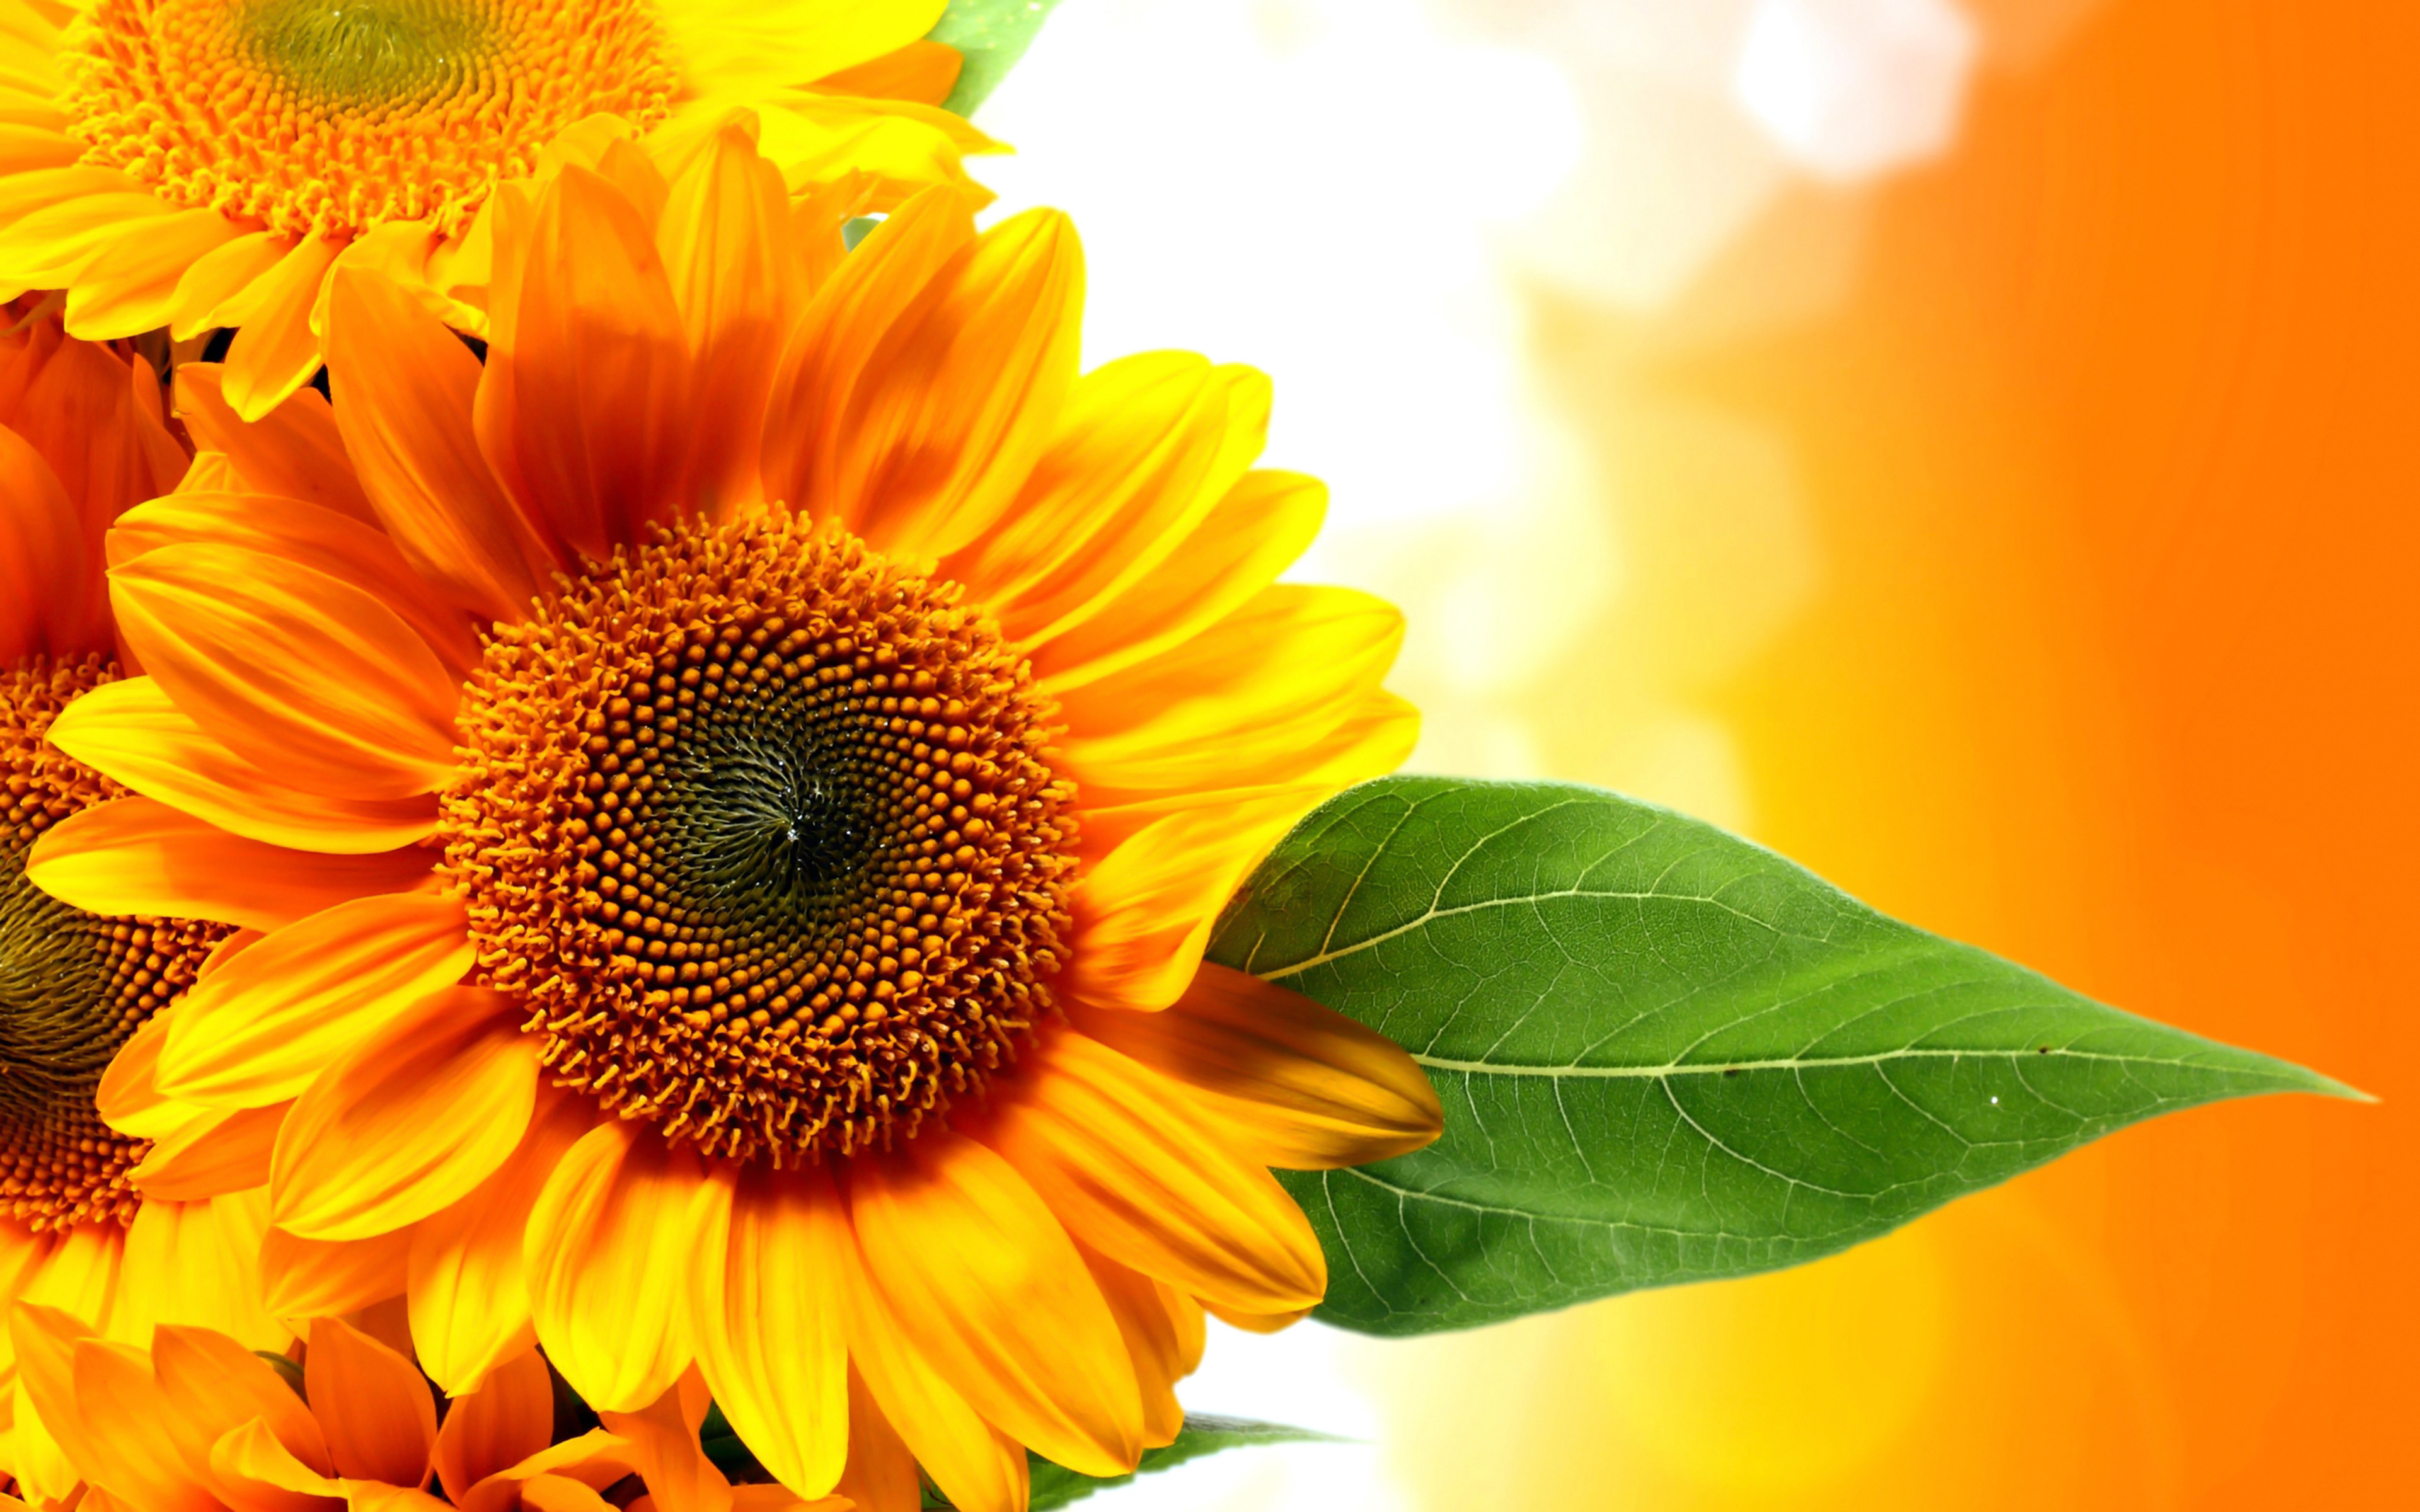 Sunflower Orange flowers beautiful golden hd wallpaper for Computers Laptop  Tablet And Mobile Phones 3840X2400 : 